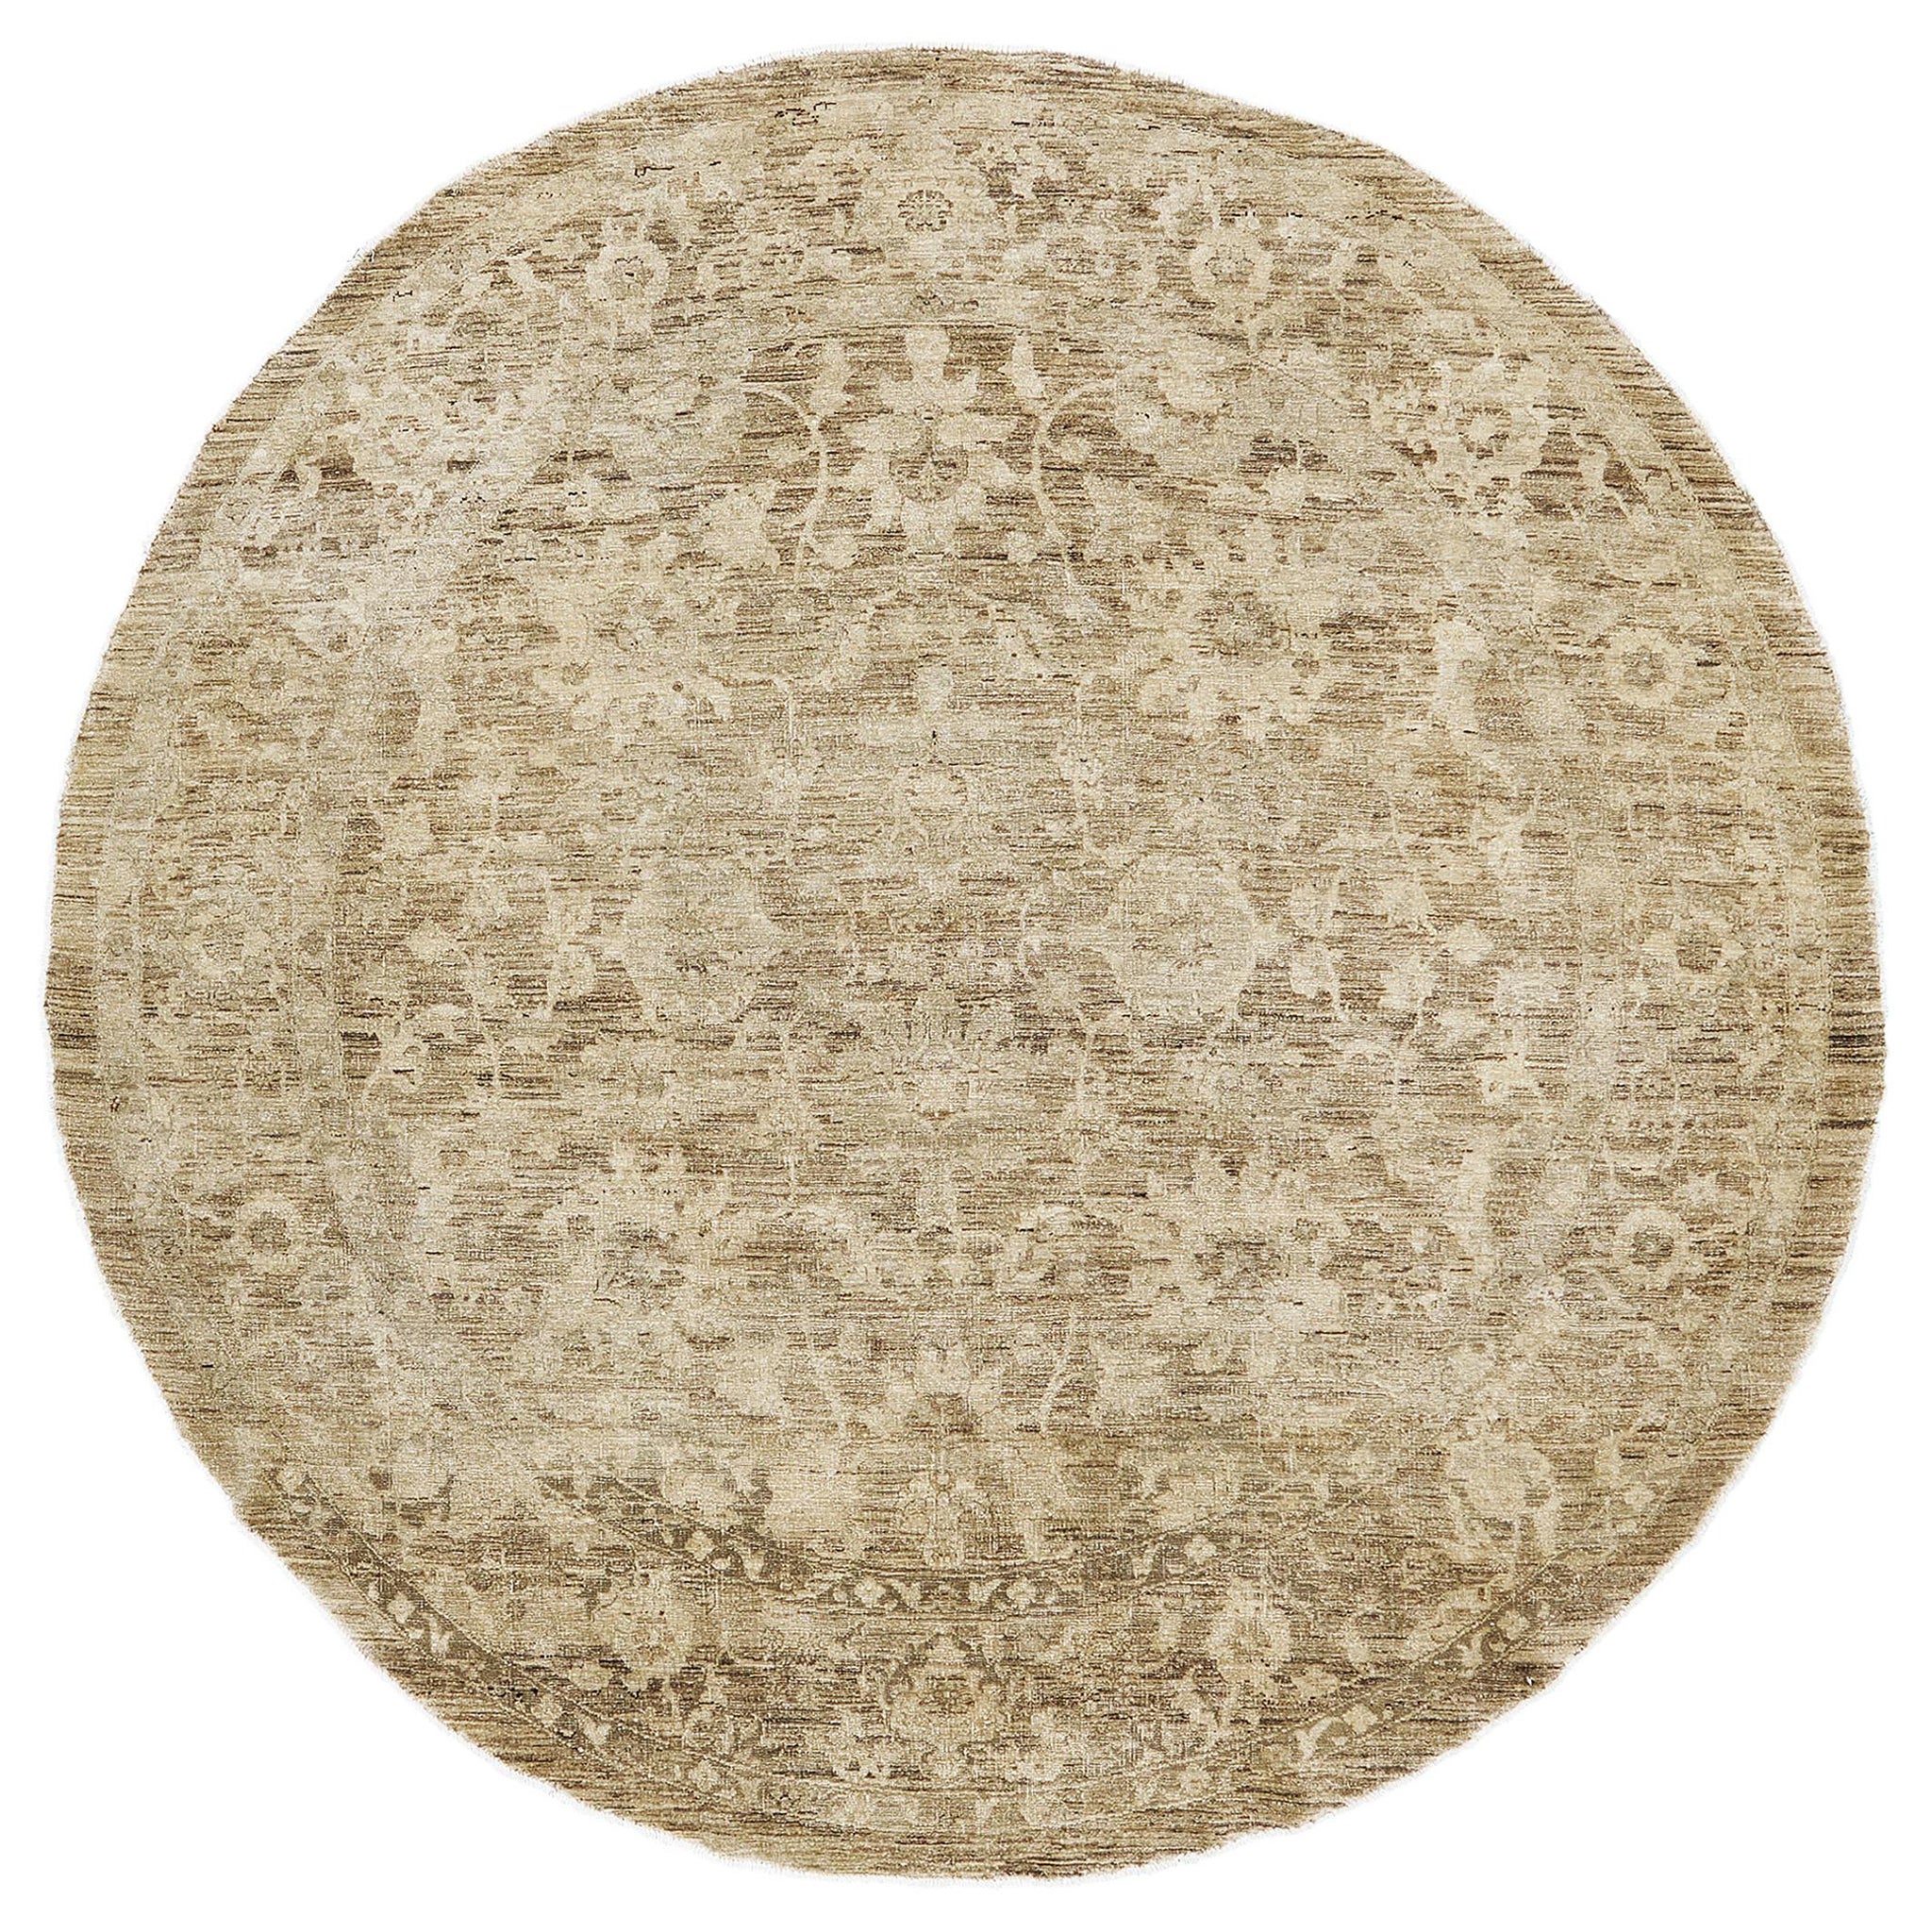 Vintage Style Sultanabad Revival Round Rug